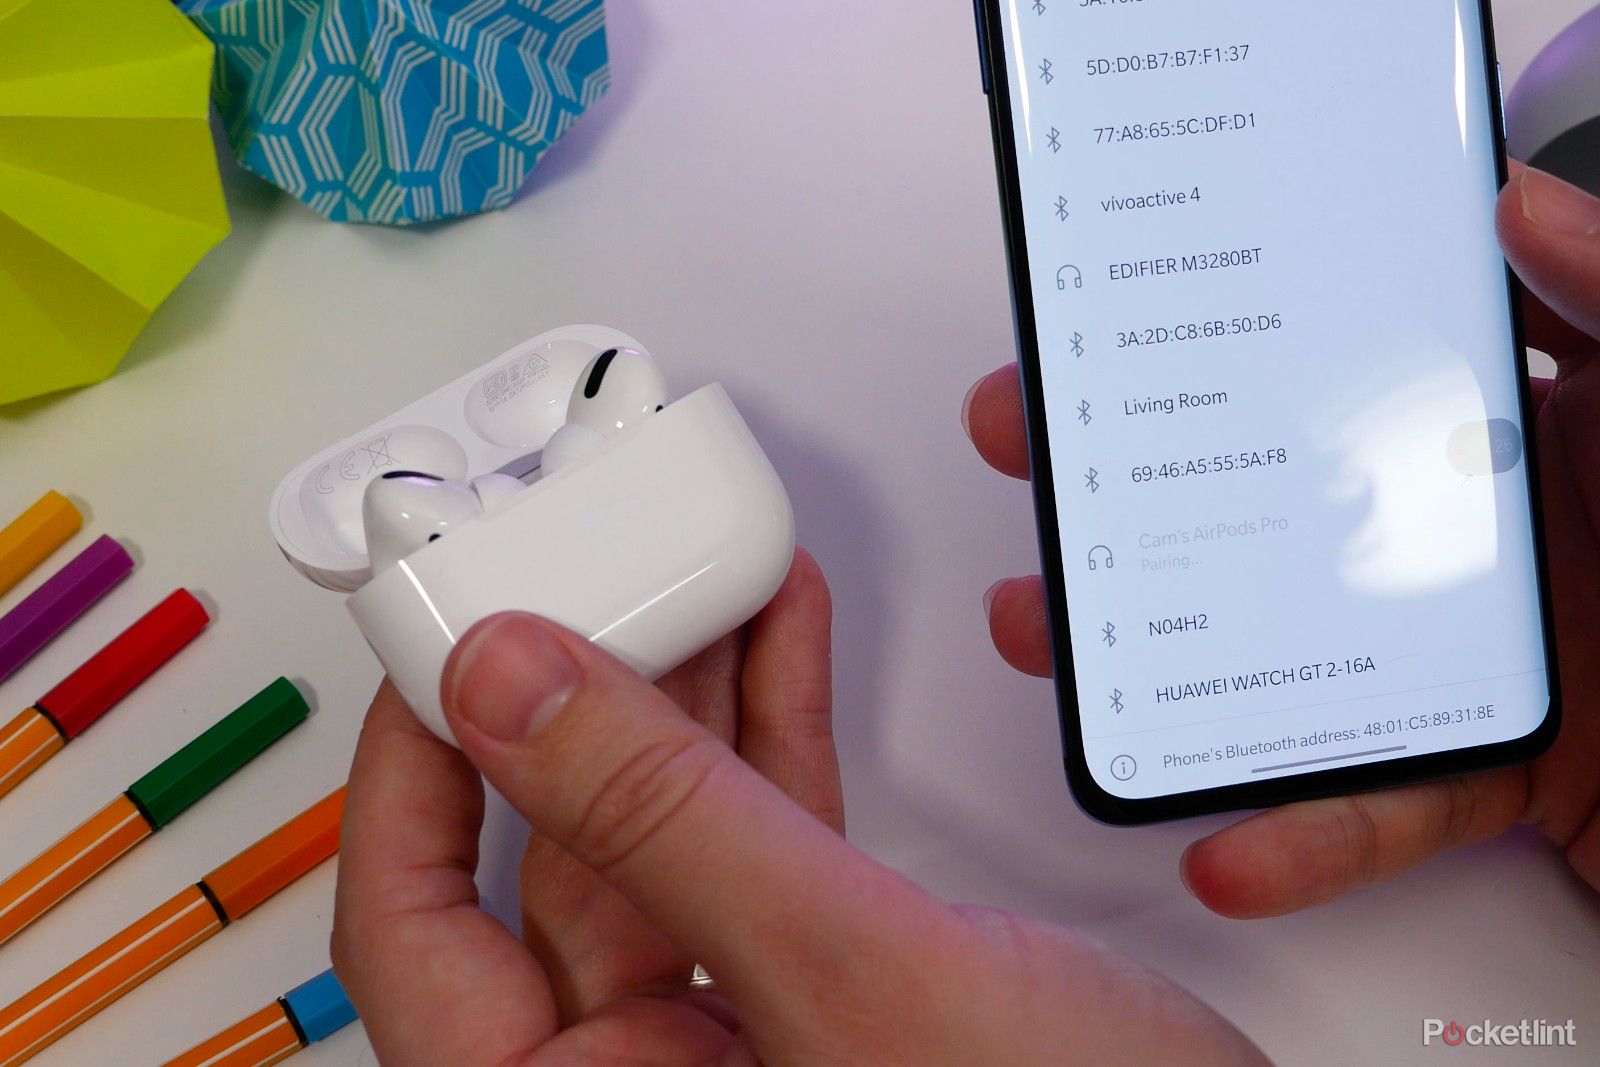 to use Apple AirPods with an Android phone